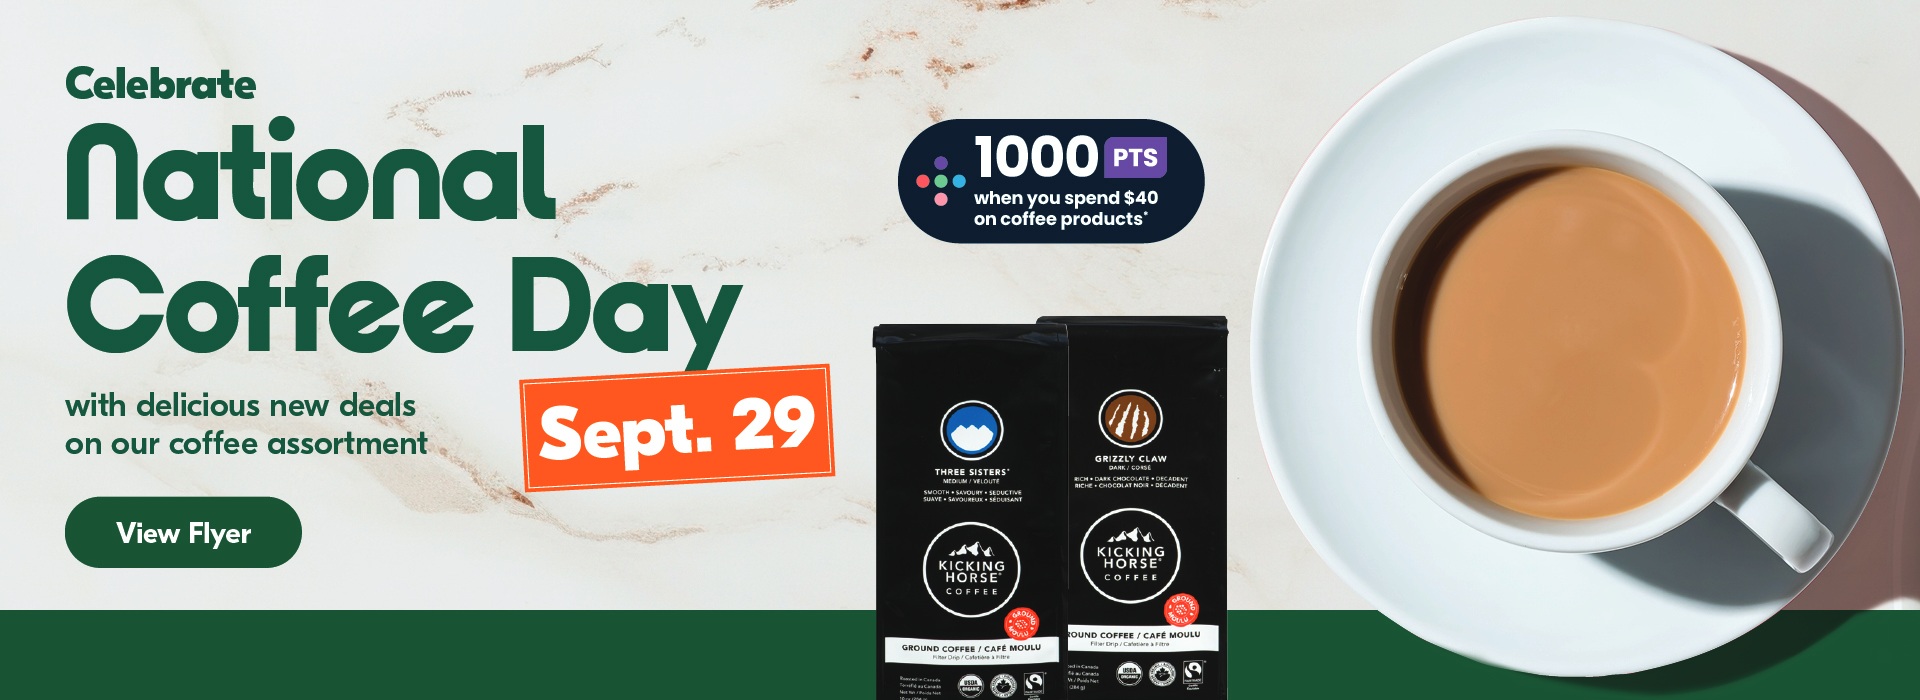 Sept 29 is National Coffee Day